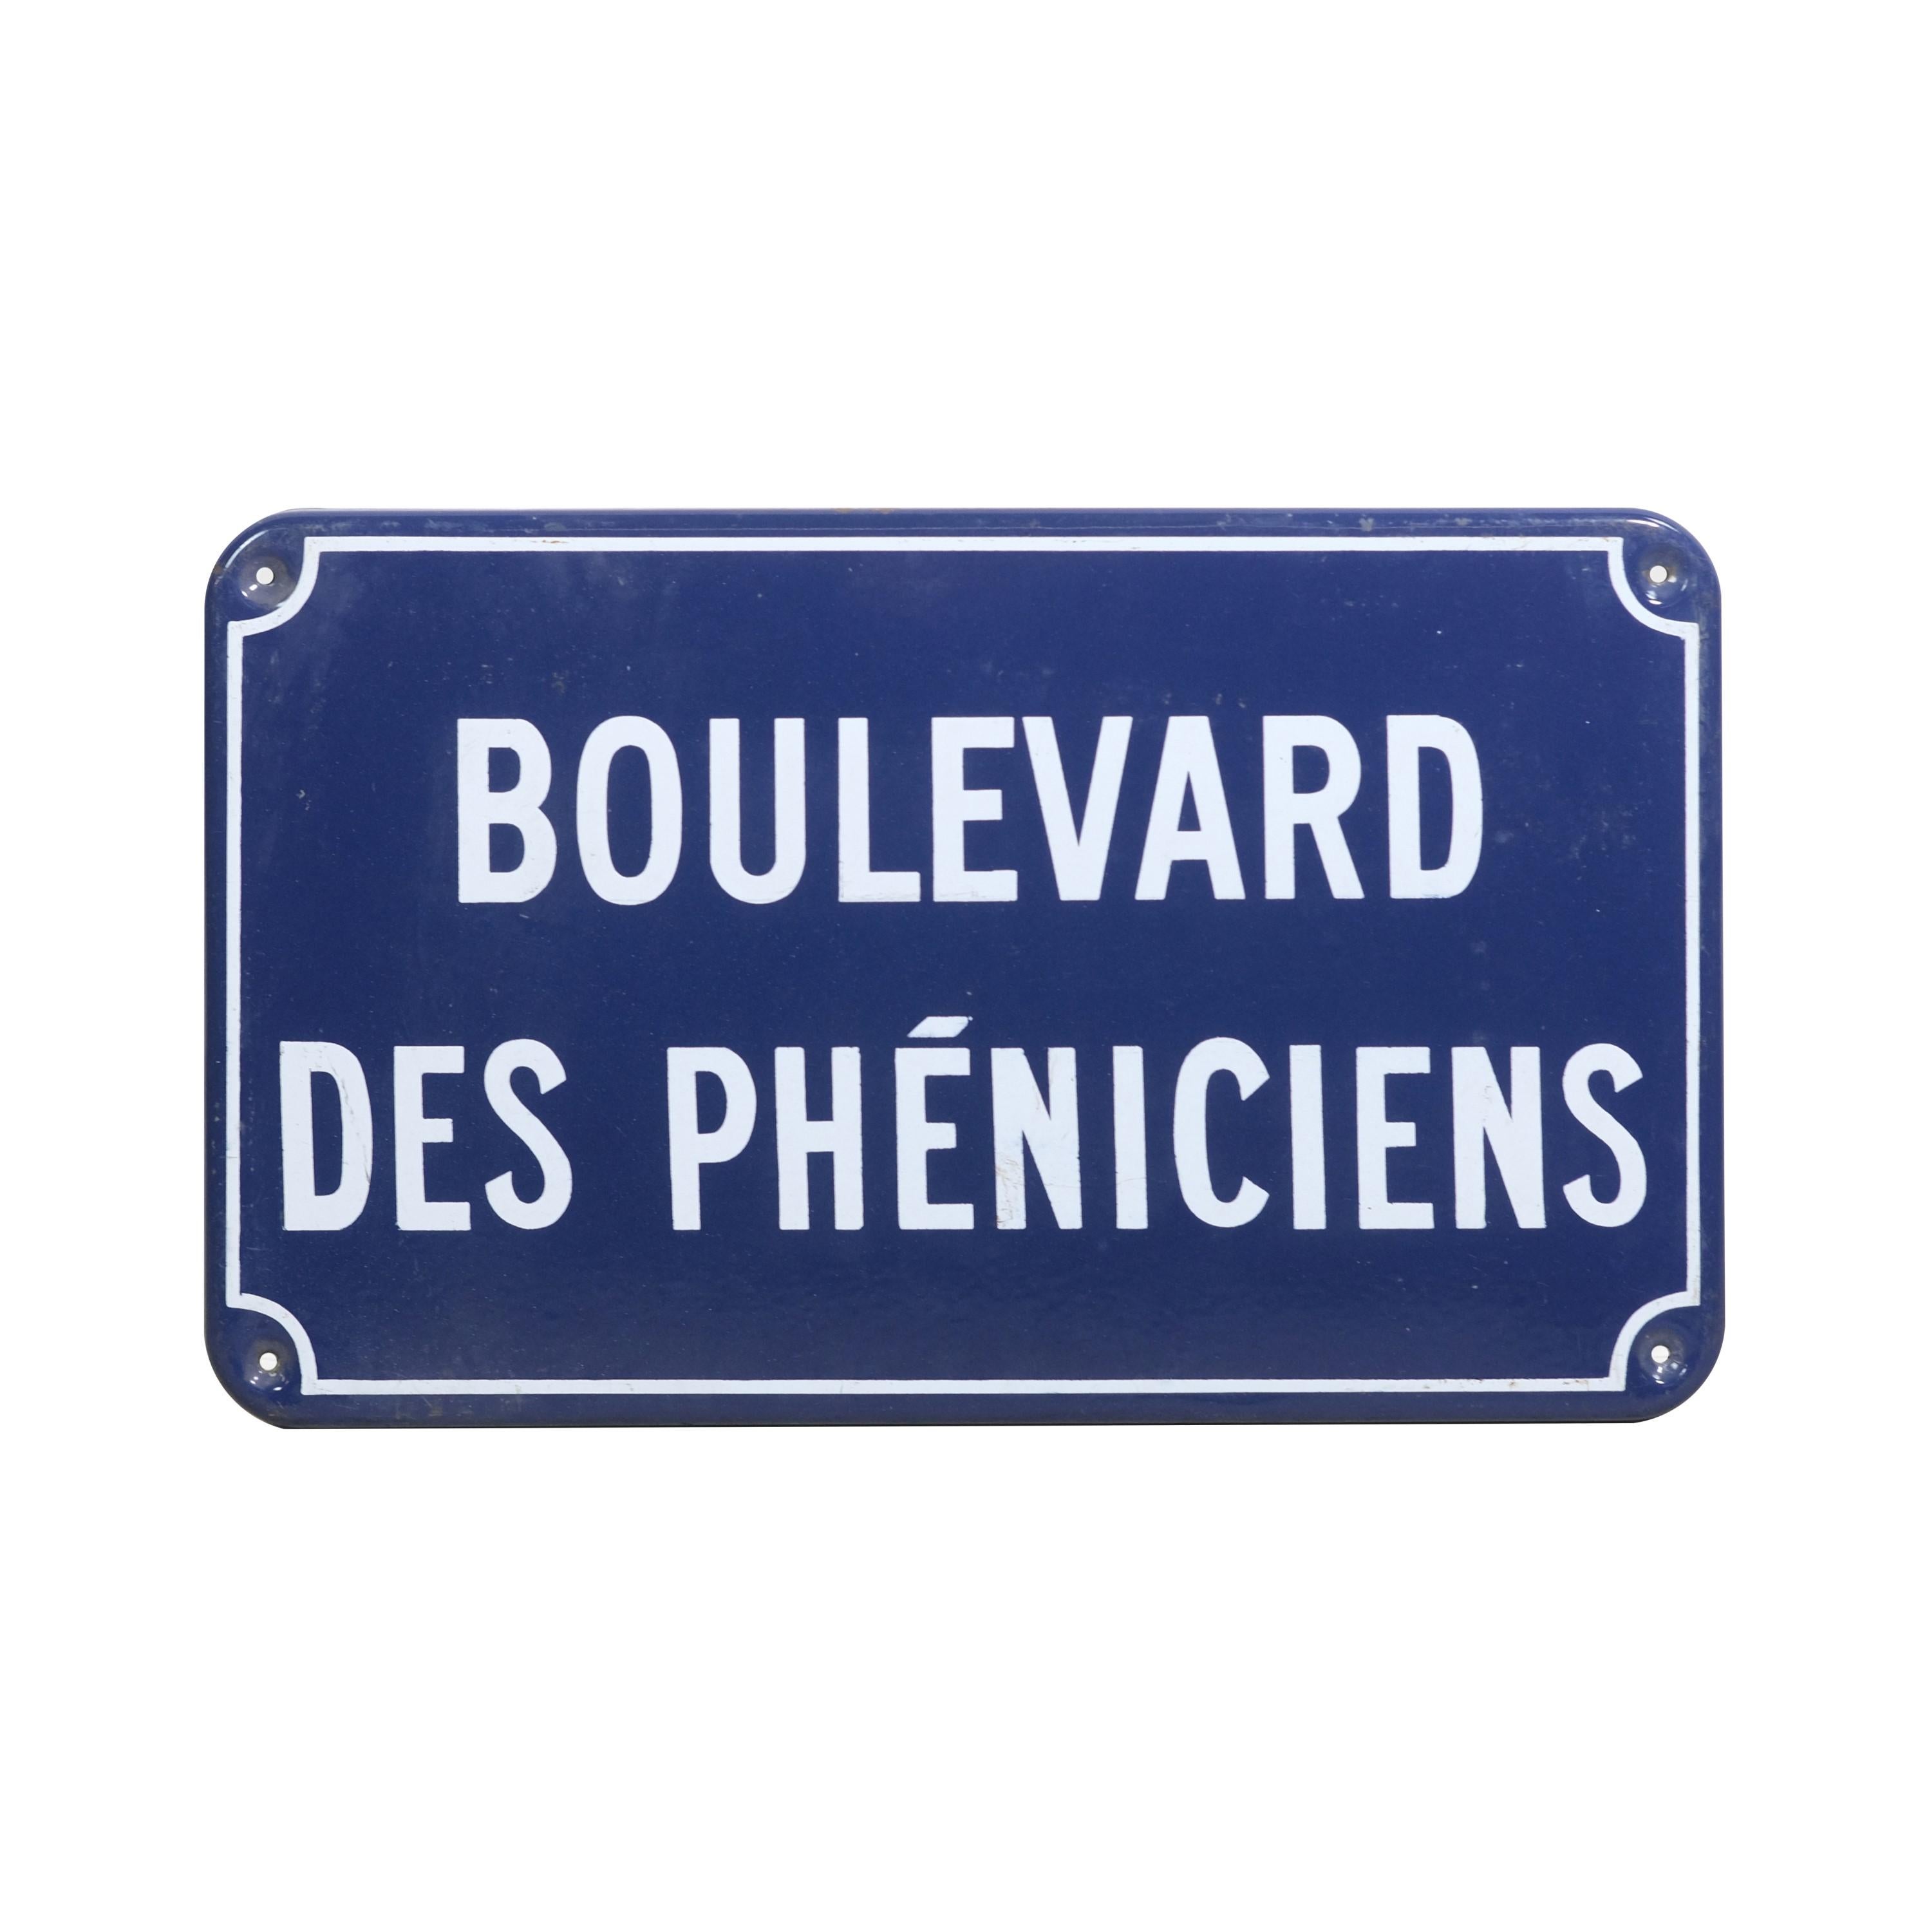 Street sign from 20th century France. Manufactured out of steel with blue and white enamel. In French 